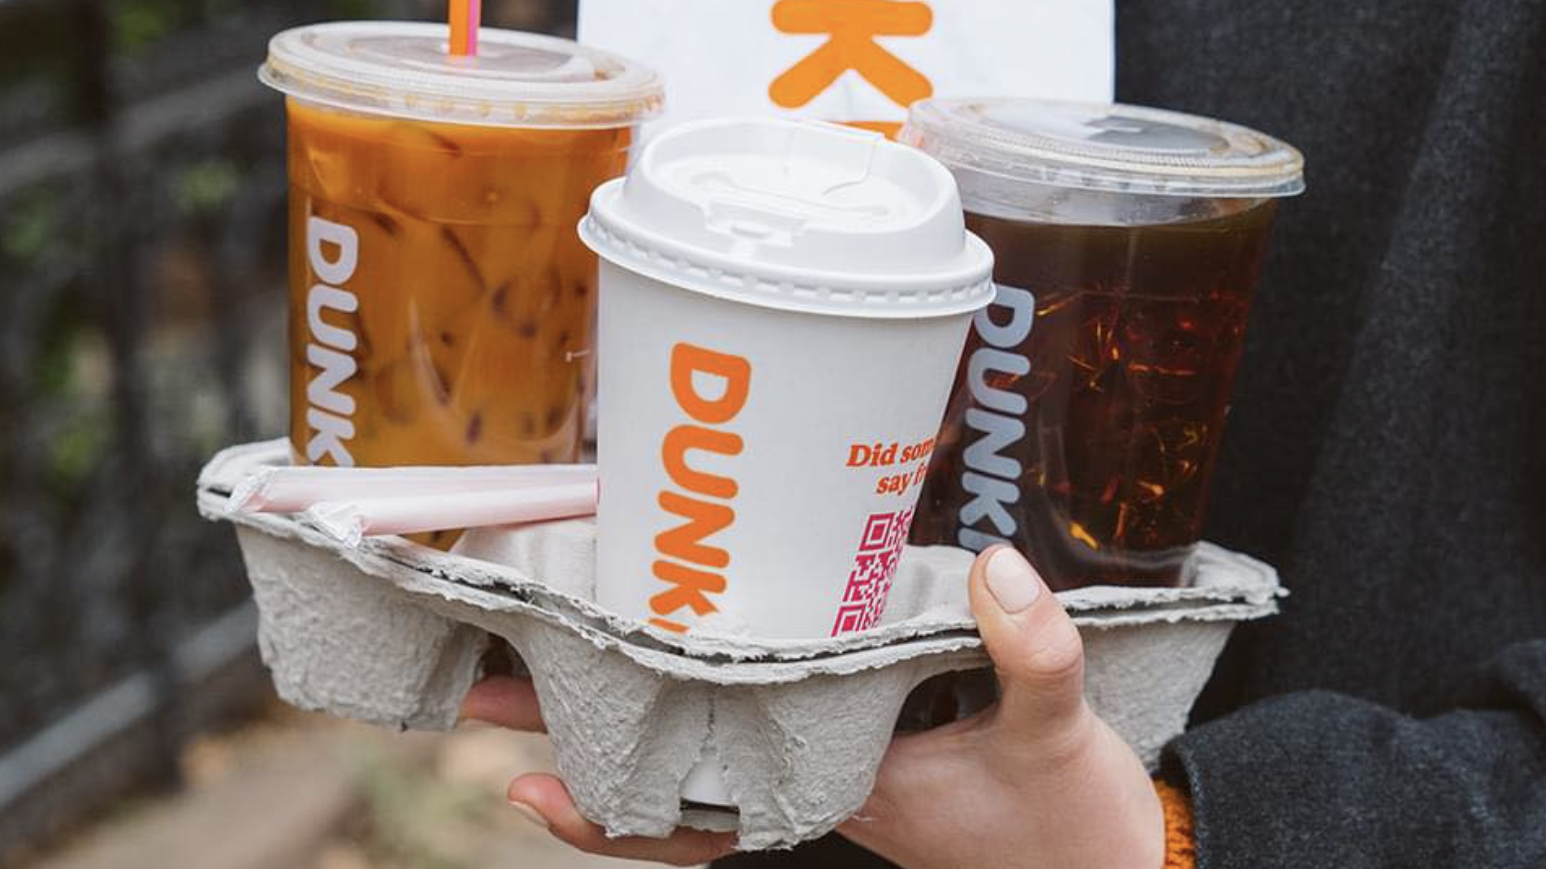 Dunkin' Donuts Coffees